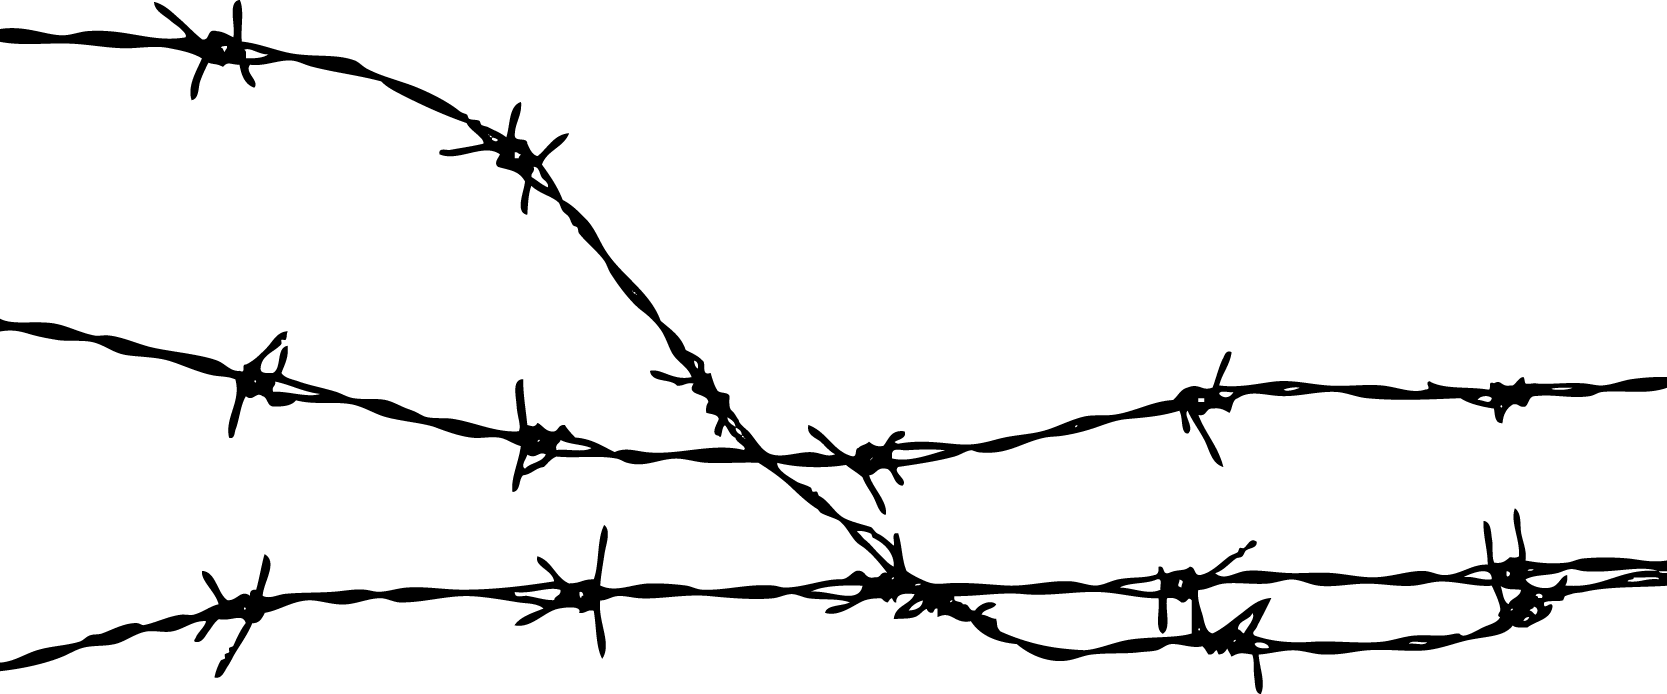 Free Barbed Wire Clipart, Download Free Clip Art, Free Clip.